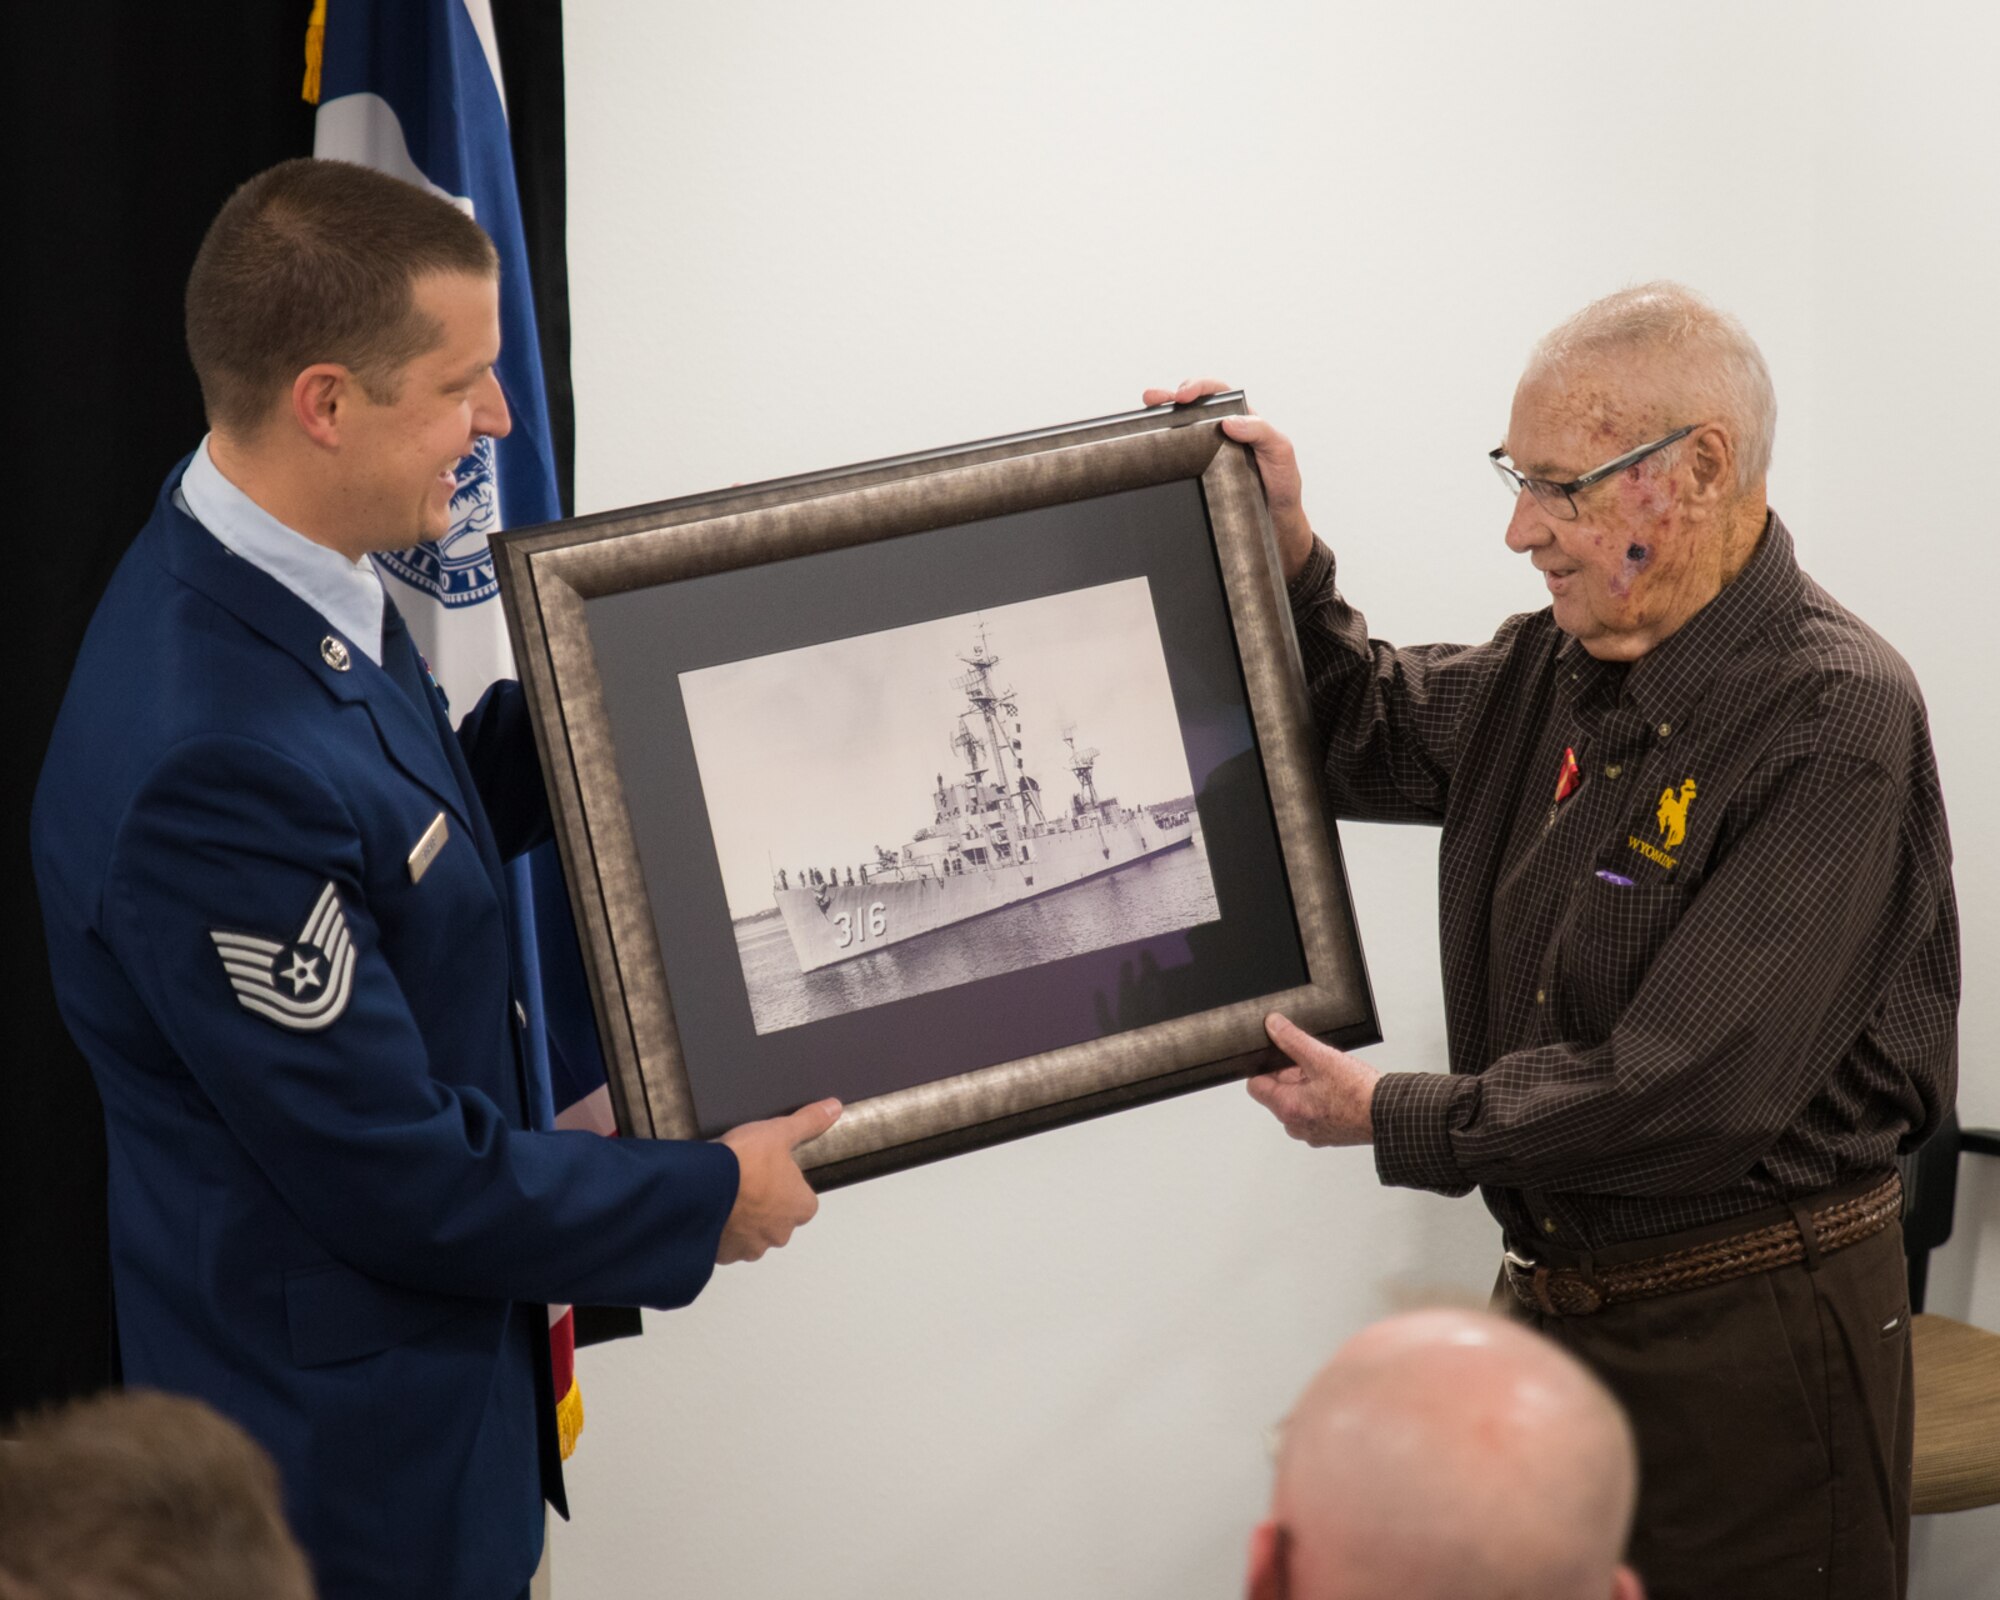 U.S. Air Force Tech. Sgt. Bryce Bishop and his grandfather, Kenneth Murphy, pose for a picture during a medal presentation ceremony, Dec. 3, 2016 at Cheyenne Air National Guard base in Cheyenne, Wyoming. Murphy was awarded the Ambassador for Peace Medal for his service aboard the USS Harveson (DE) as a U.S. Navy gunners mate during the Korean War. (U.S. Air National Guard photo by Tech. Sgt. John Galvin/released)